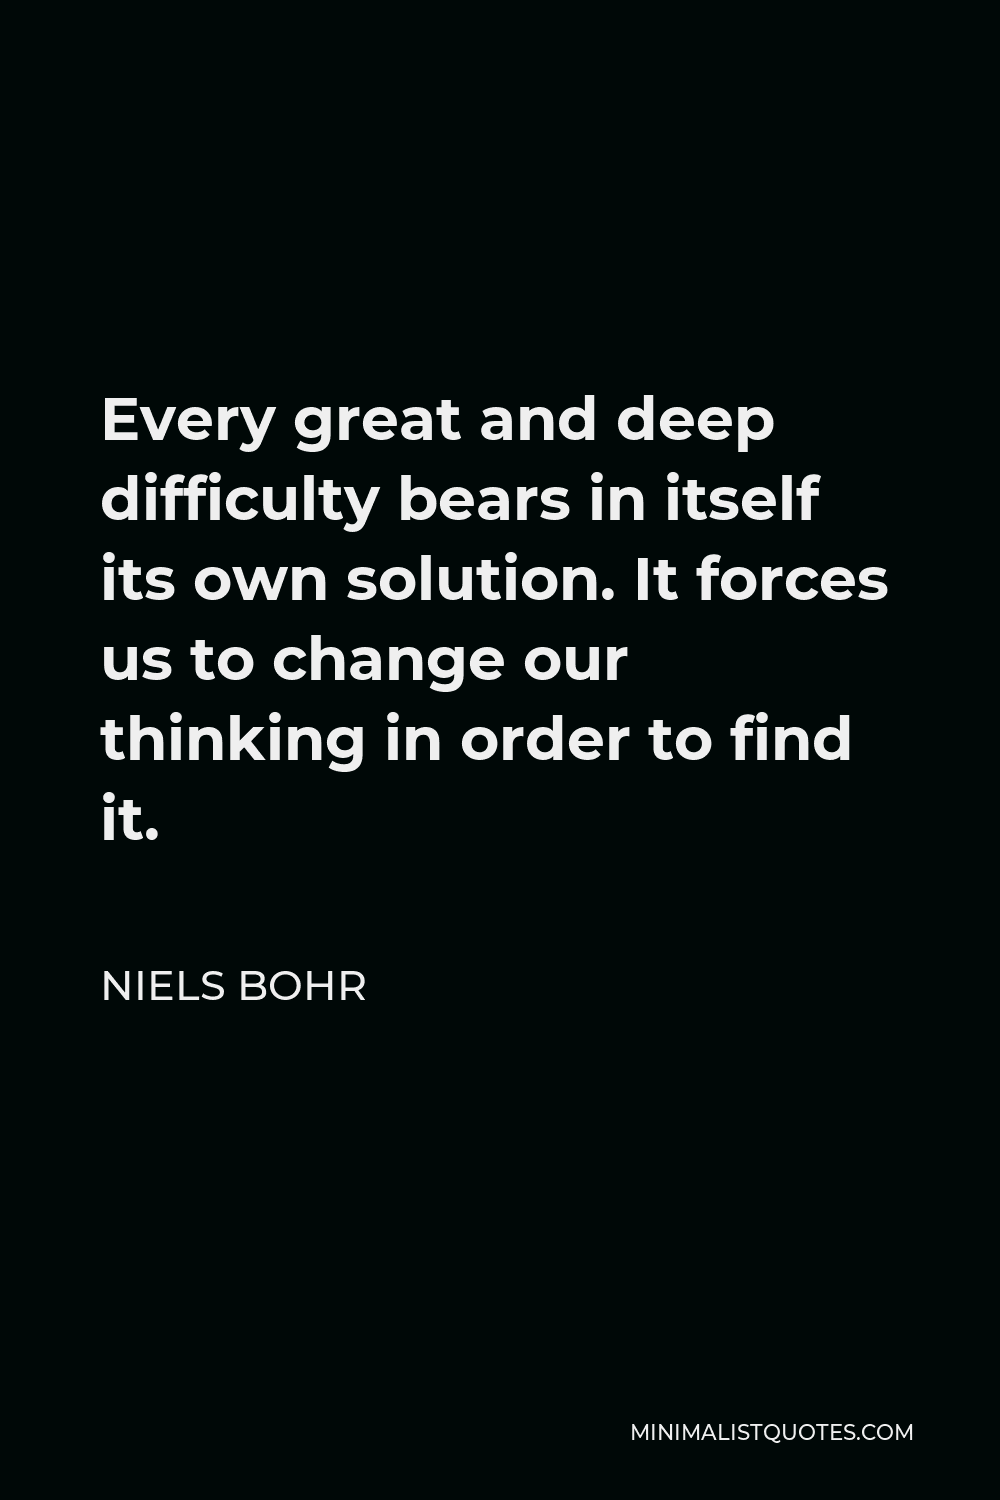 Niels Bohr Quote - Every great and deep difficulty bears in itself its own solution. It forces us to change our thinking in order to find it.